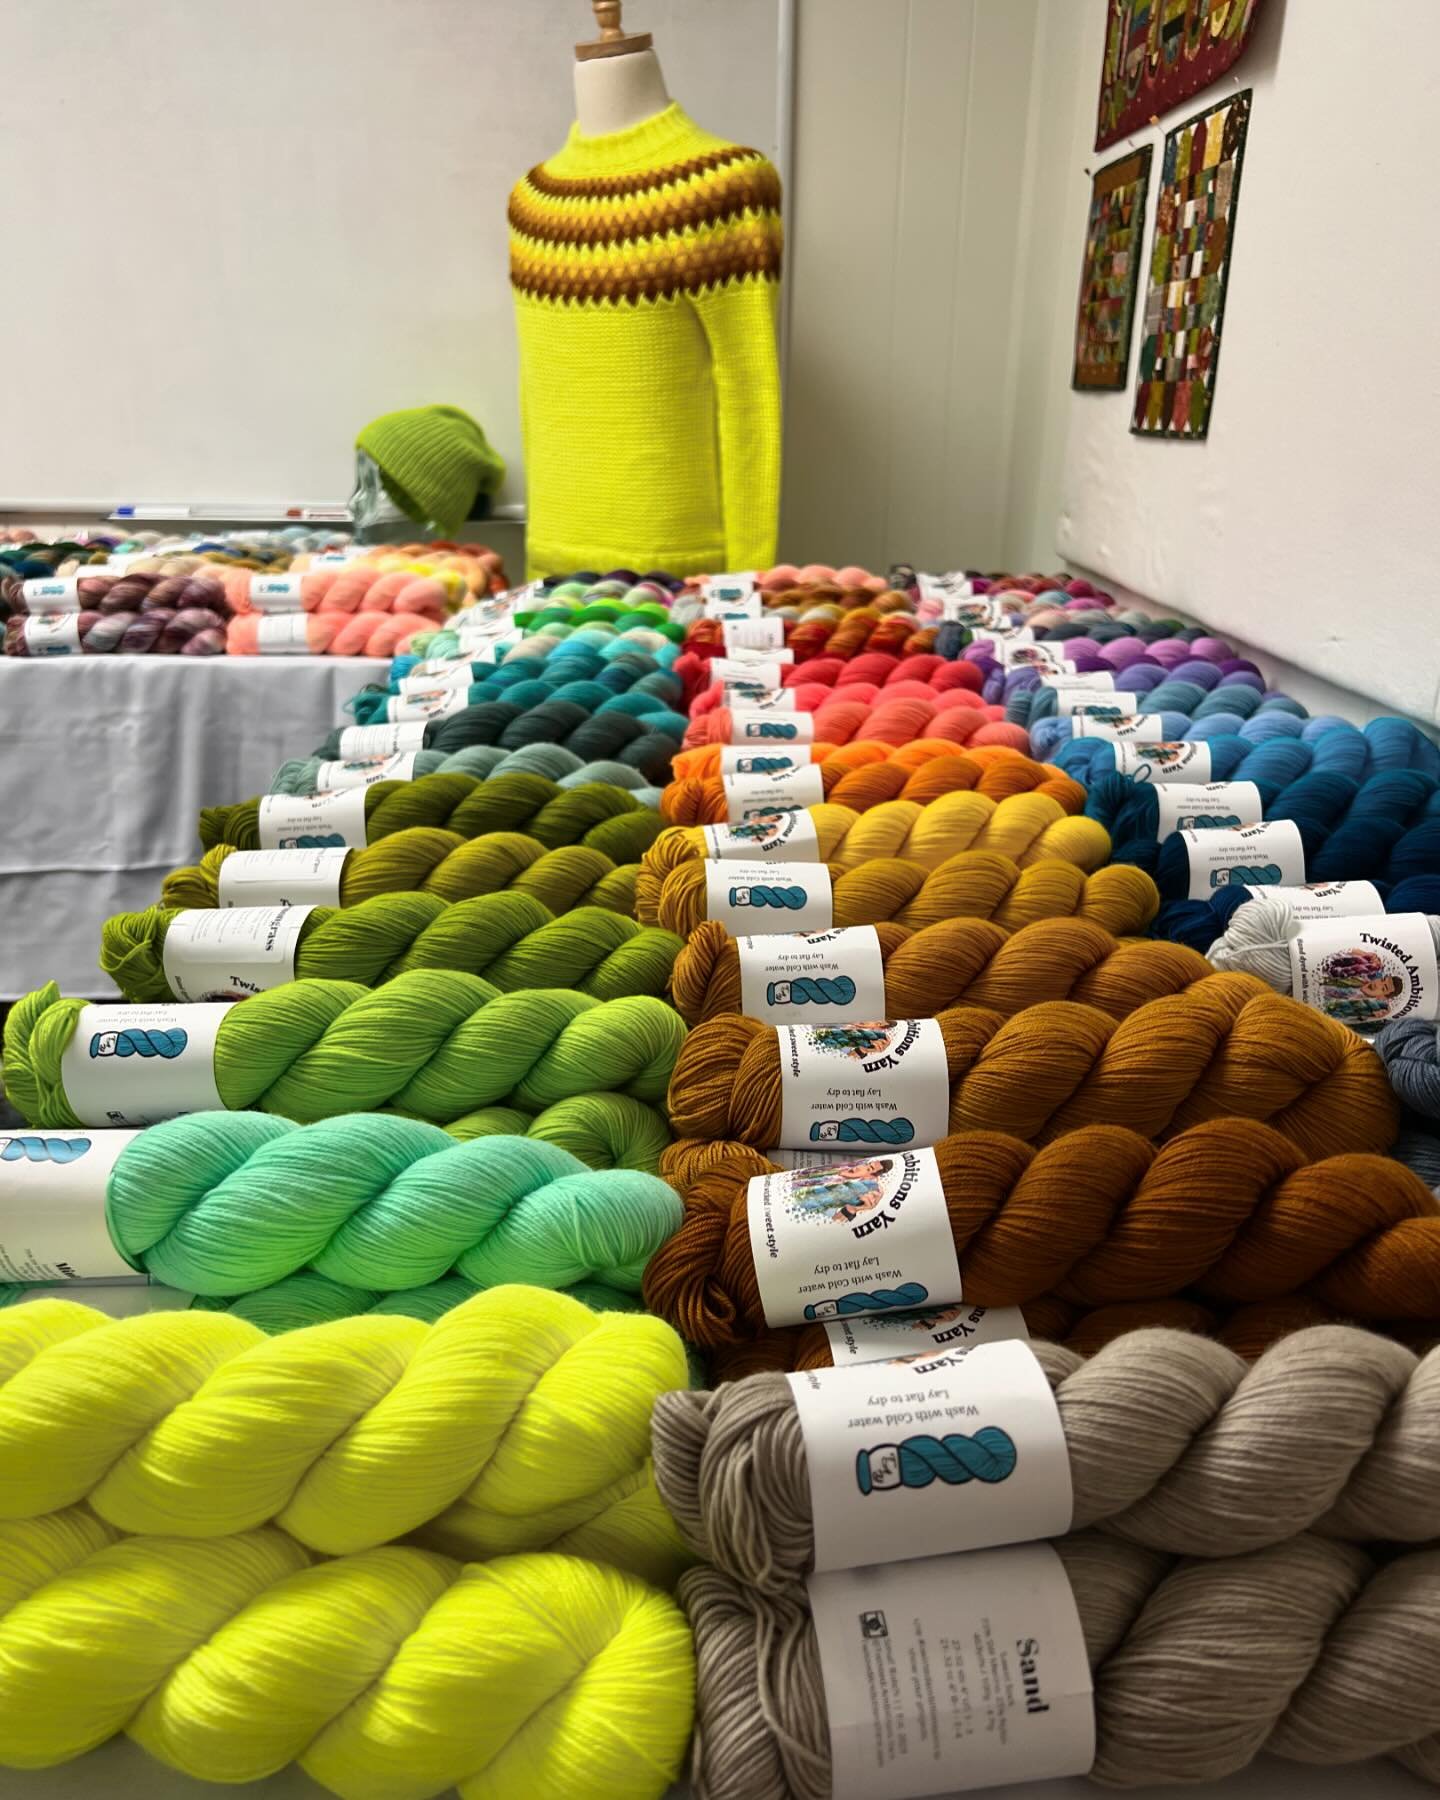 Ross from @twisted.ambitions.yarn brought a LOT of yarn! It&rsquo;s just what you hope to see in a trunk show. He will be leaving a little early today but will be here Saturday 9:30-5 and Sunday 12-5 🧶😊